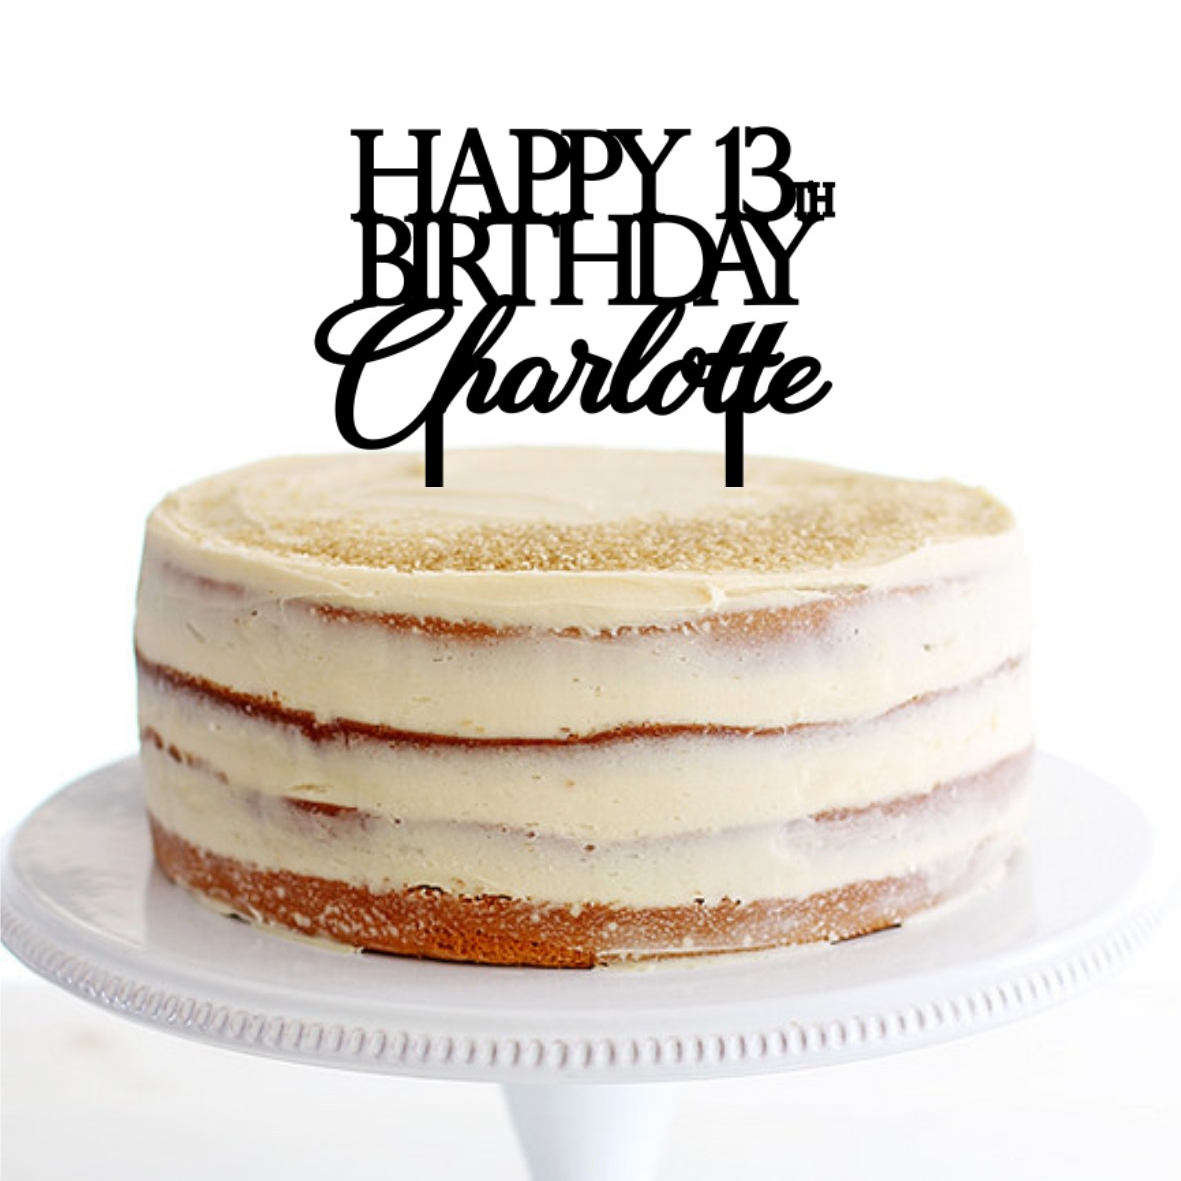 15 Best Cakes Delivery Restaurants in Charlotte | Cakes Near Me | Grubhub